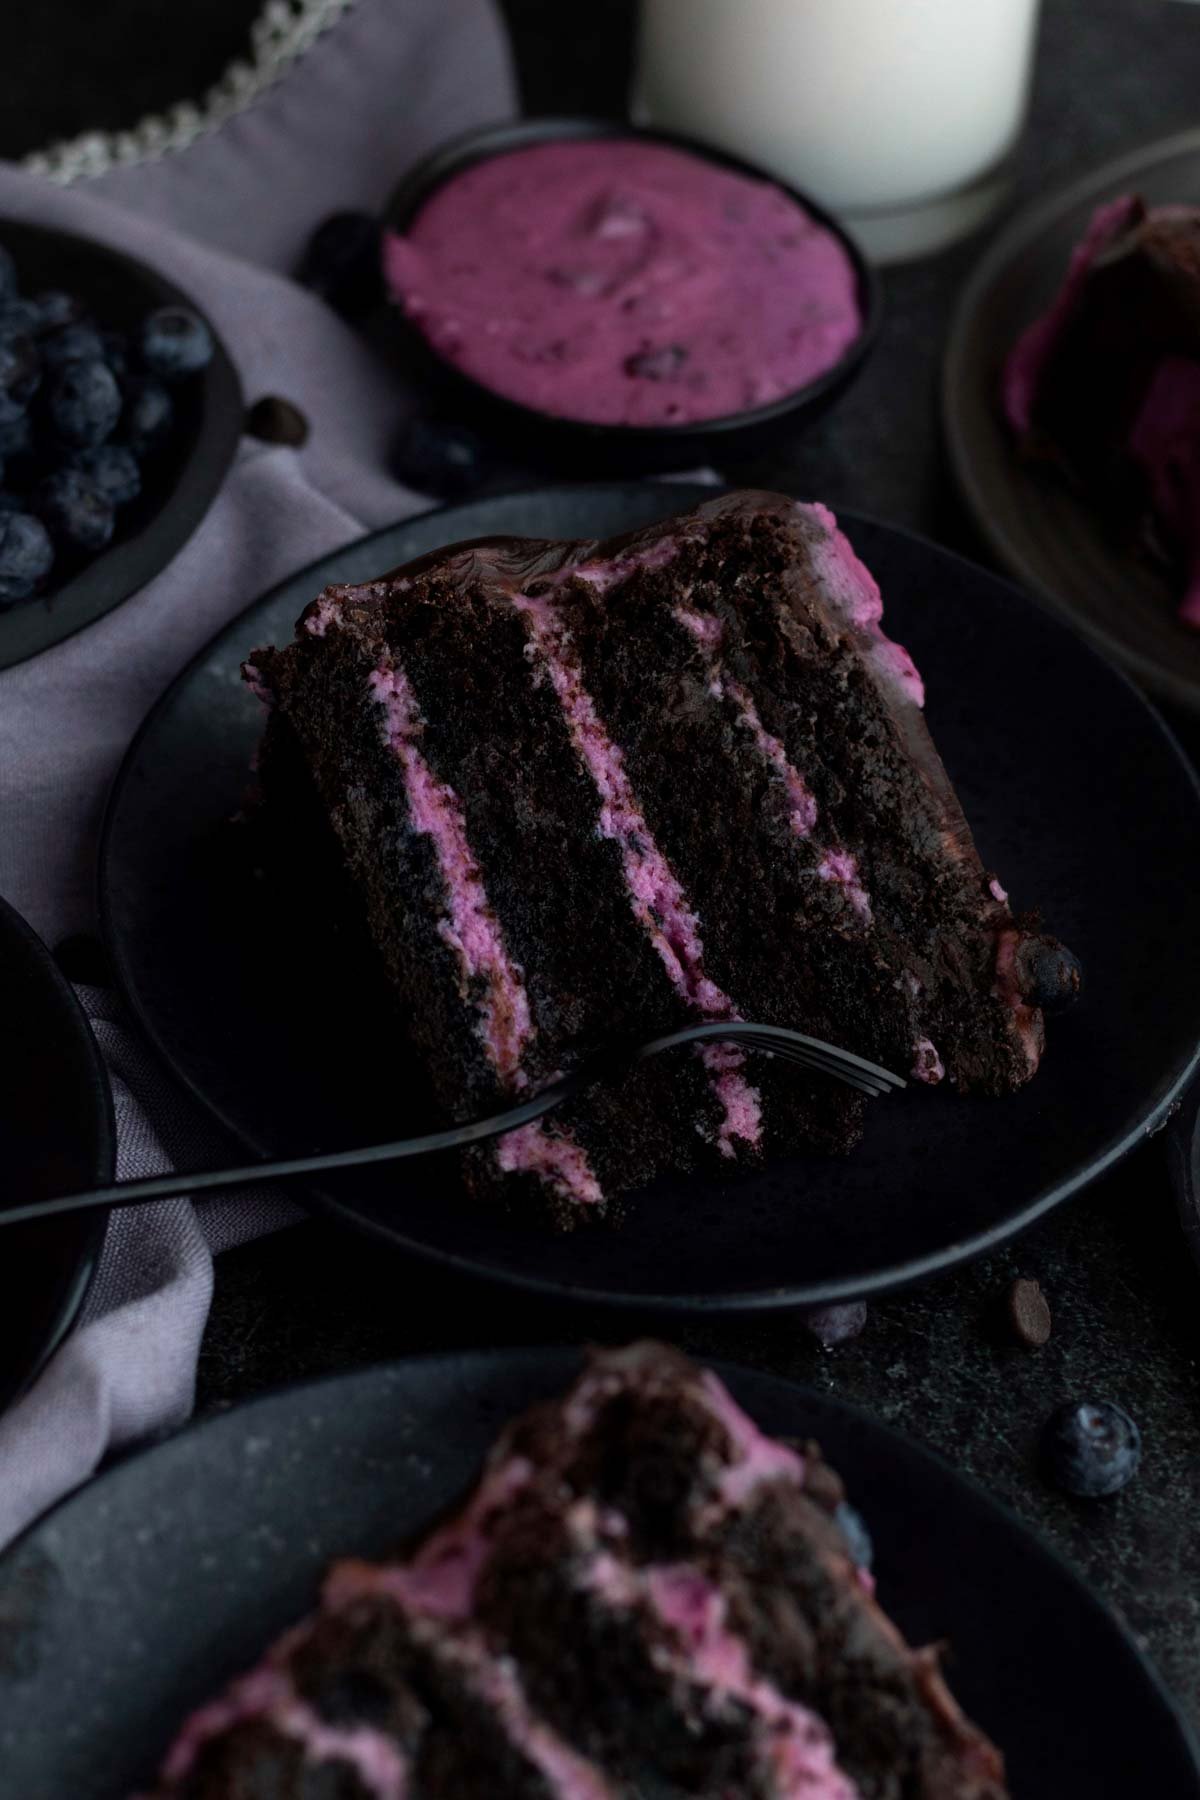 A fork slices into the dark chocolate cake with blueberry frosting.